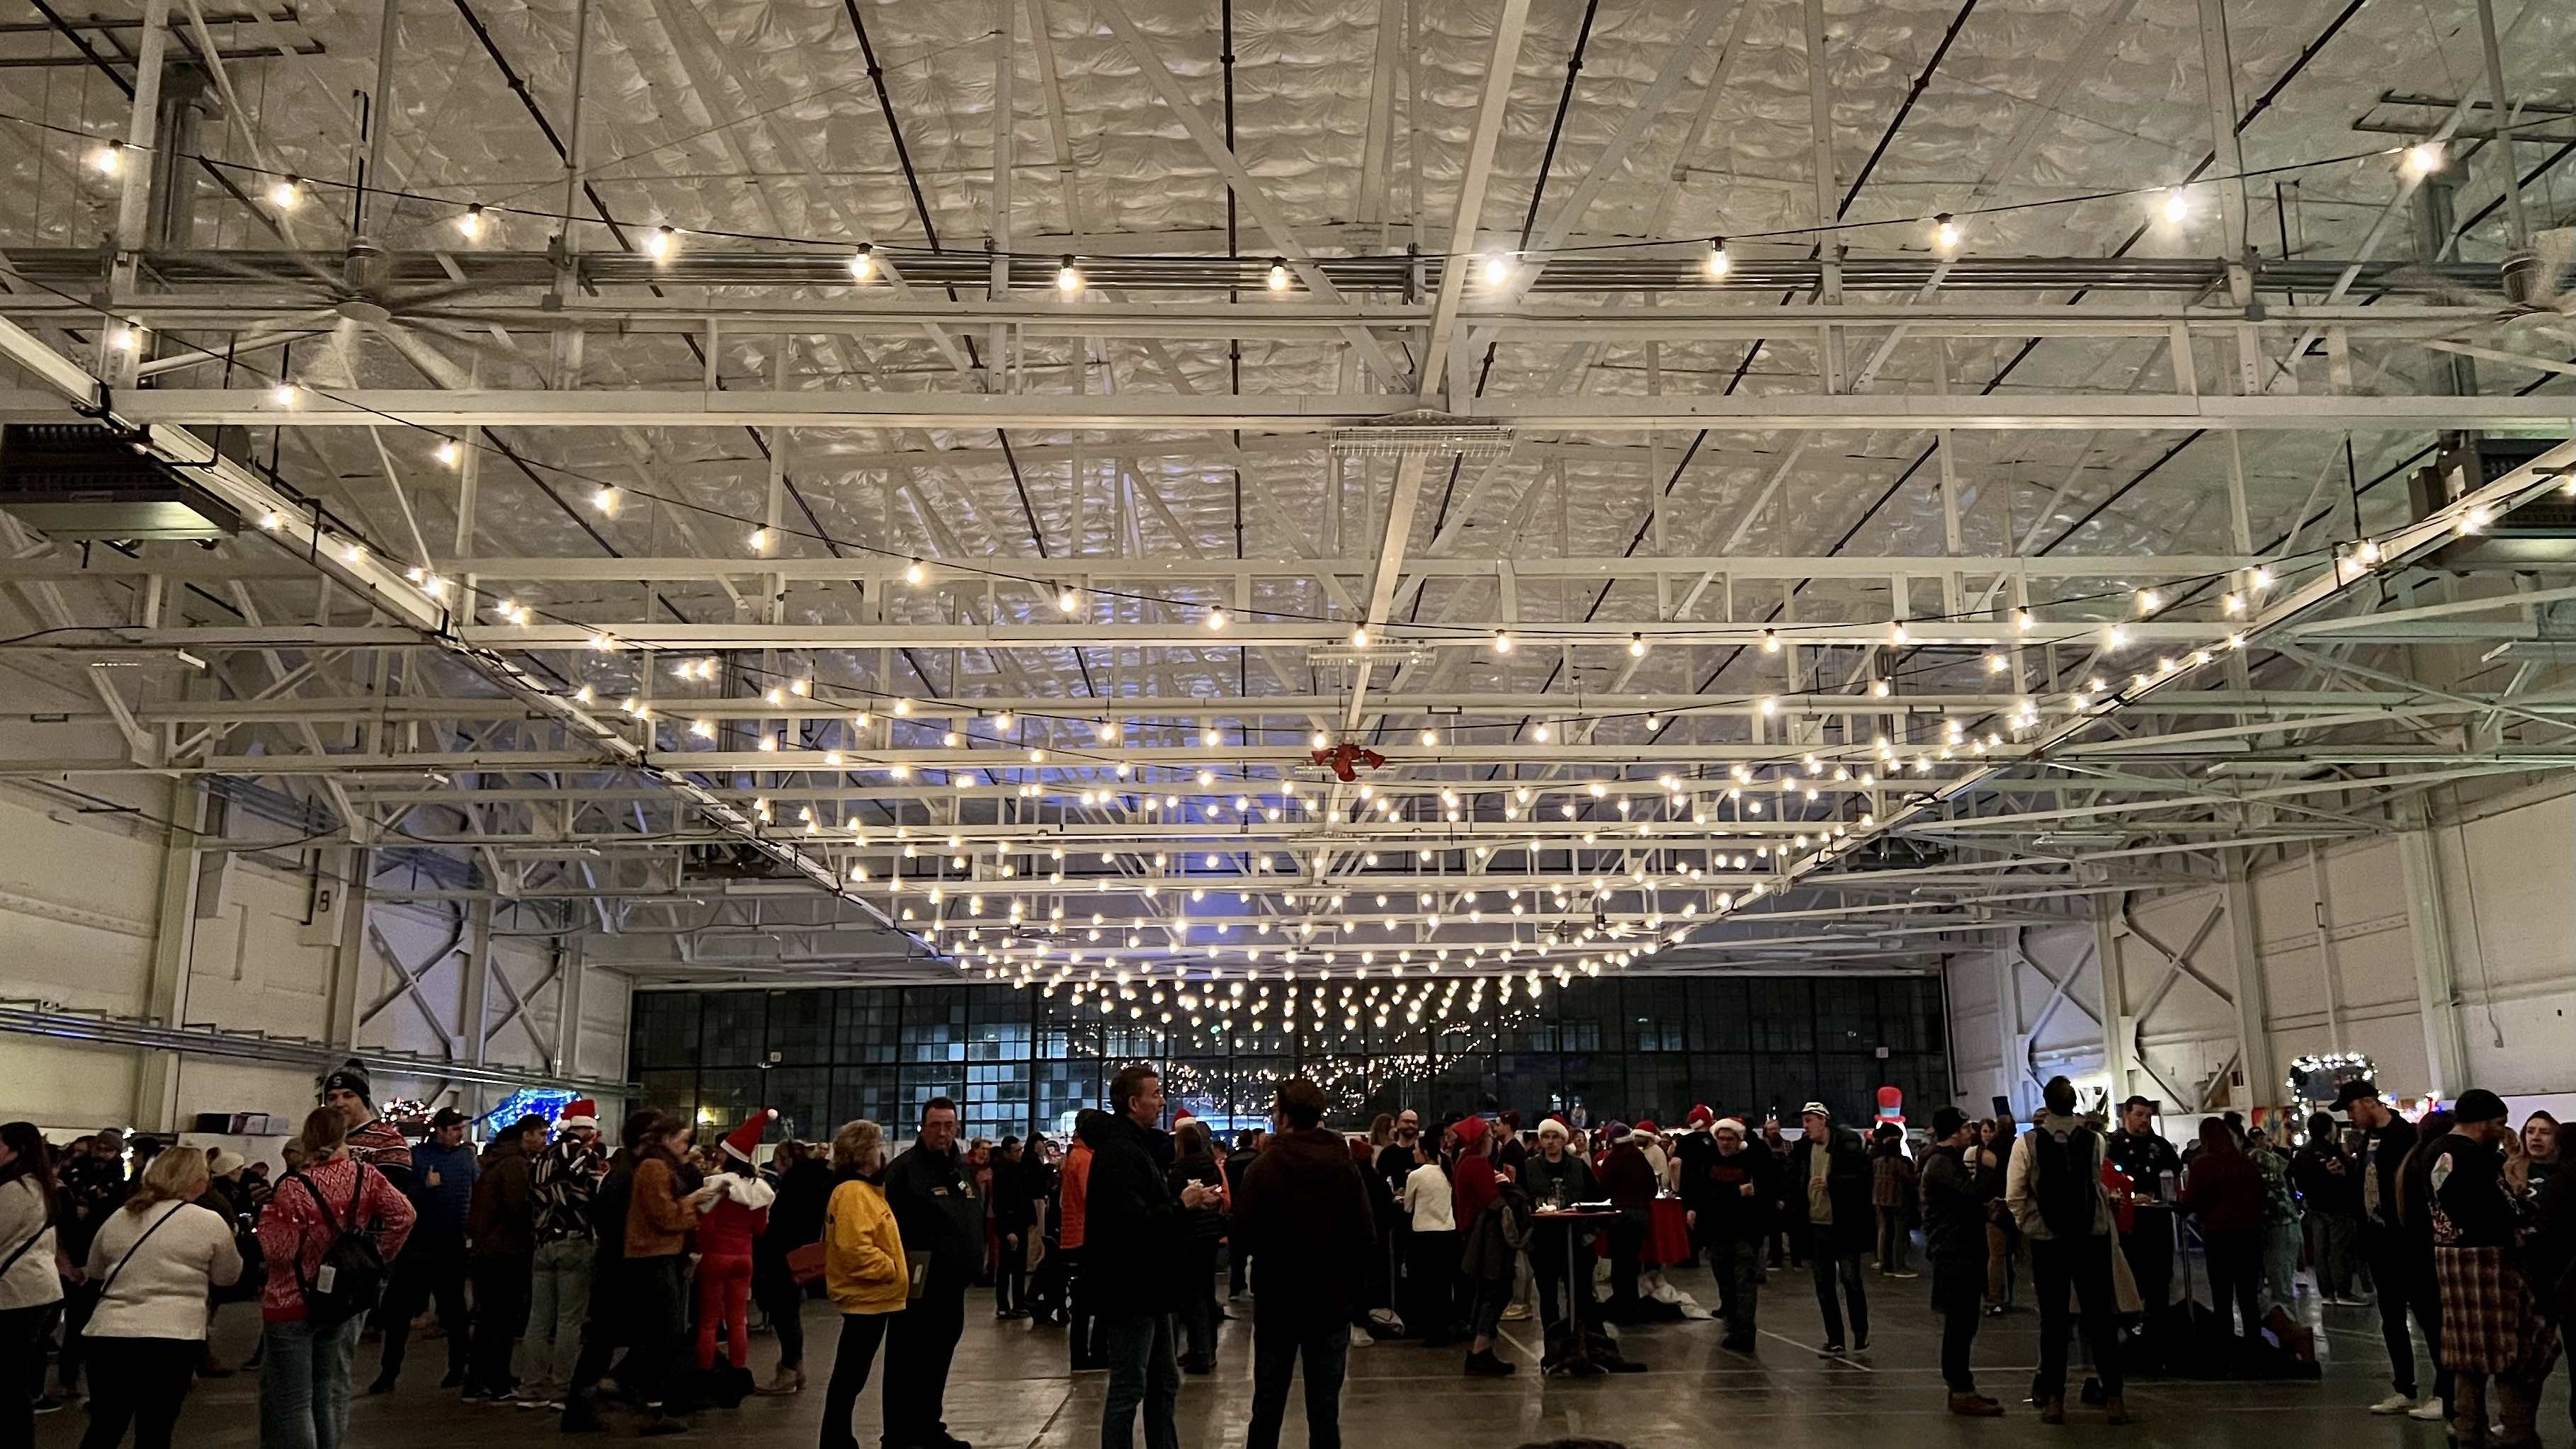 The festive crowd at the Washington Winter Beer Fest.